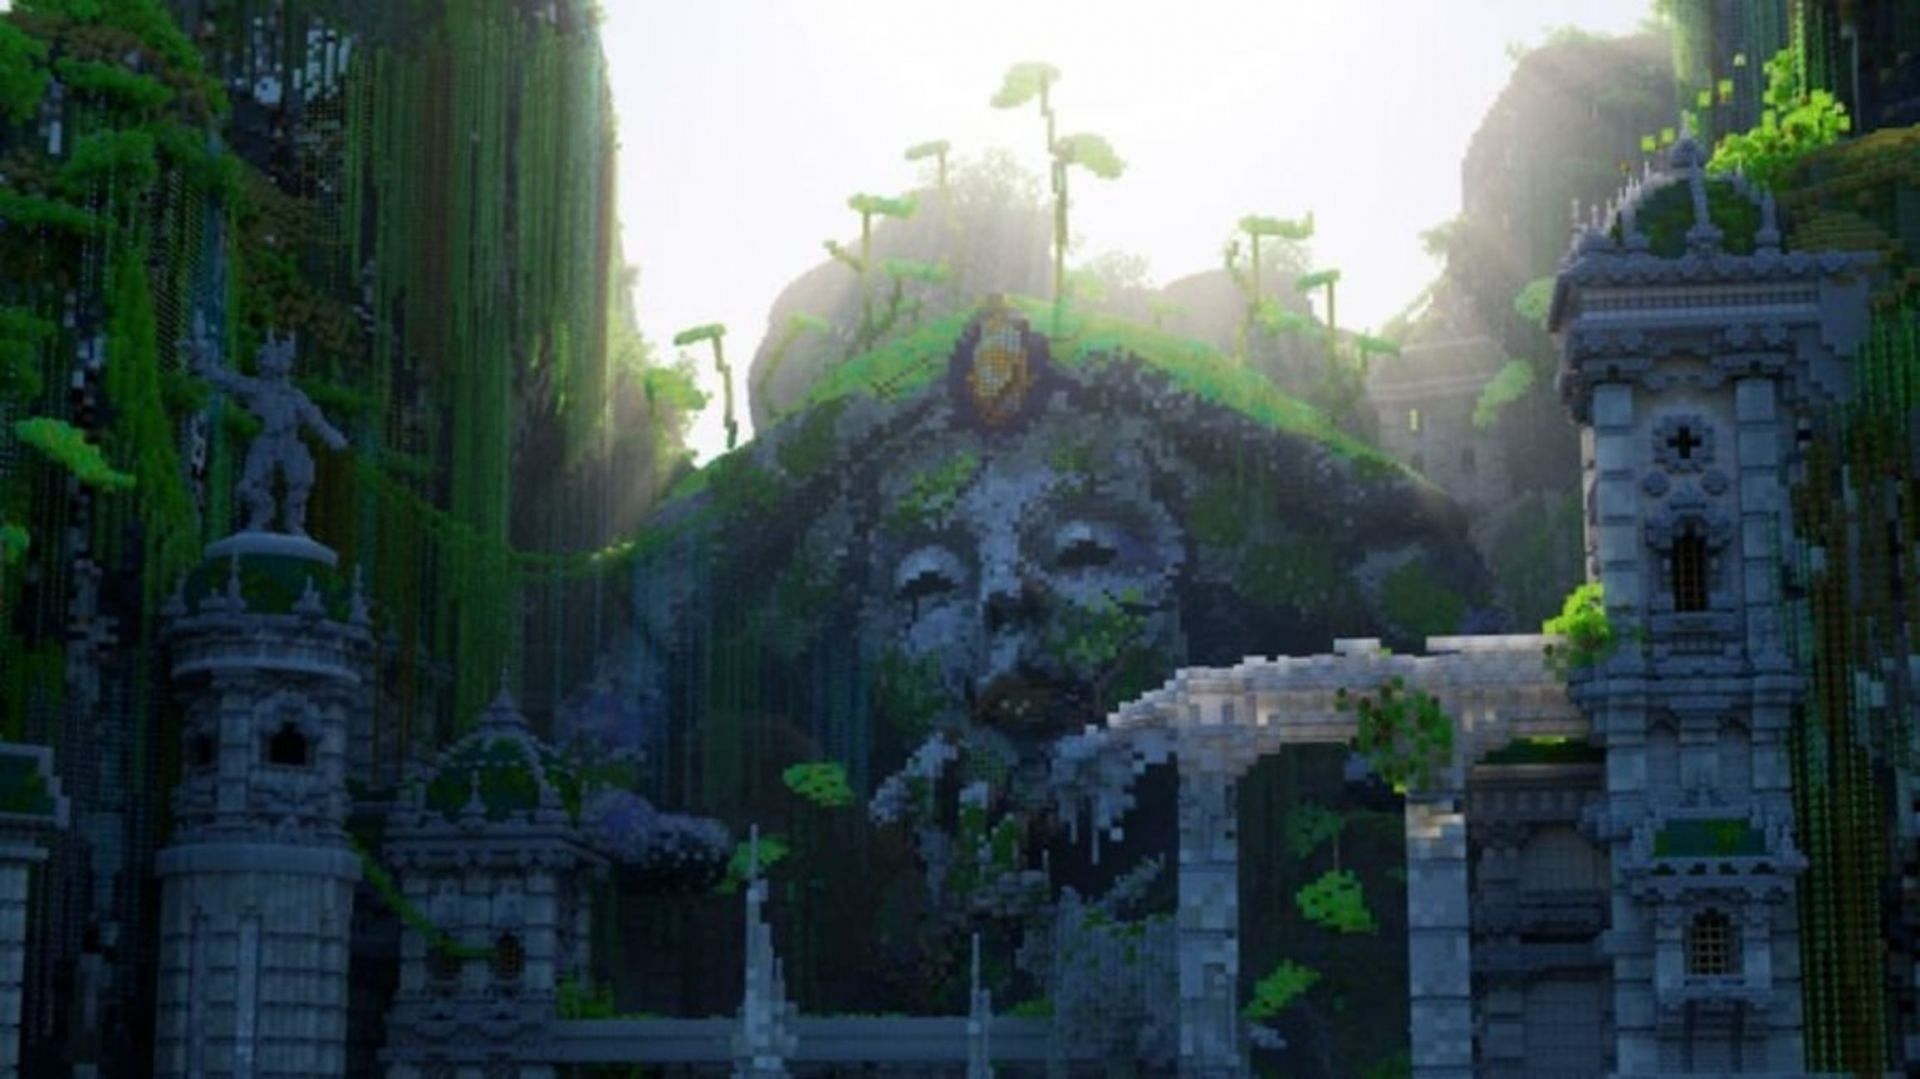 Many of the top Minecraft builds took years of work to complete (Image via Varuna Builds)